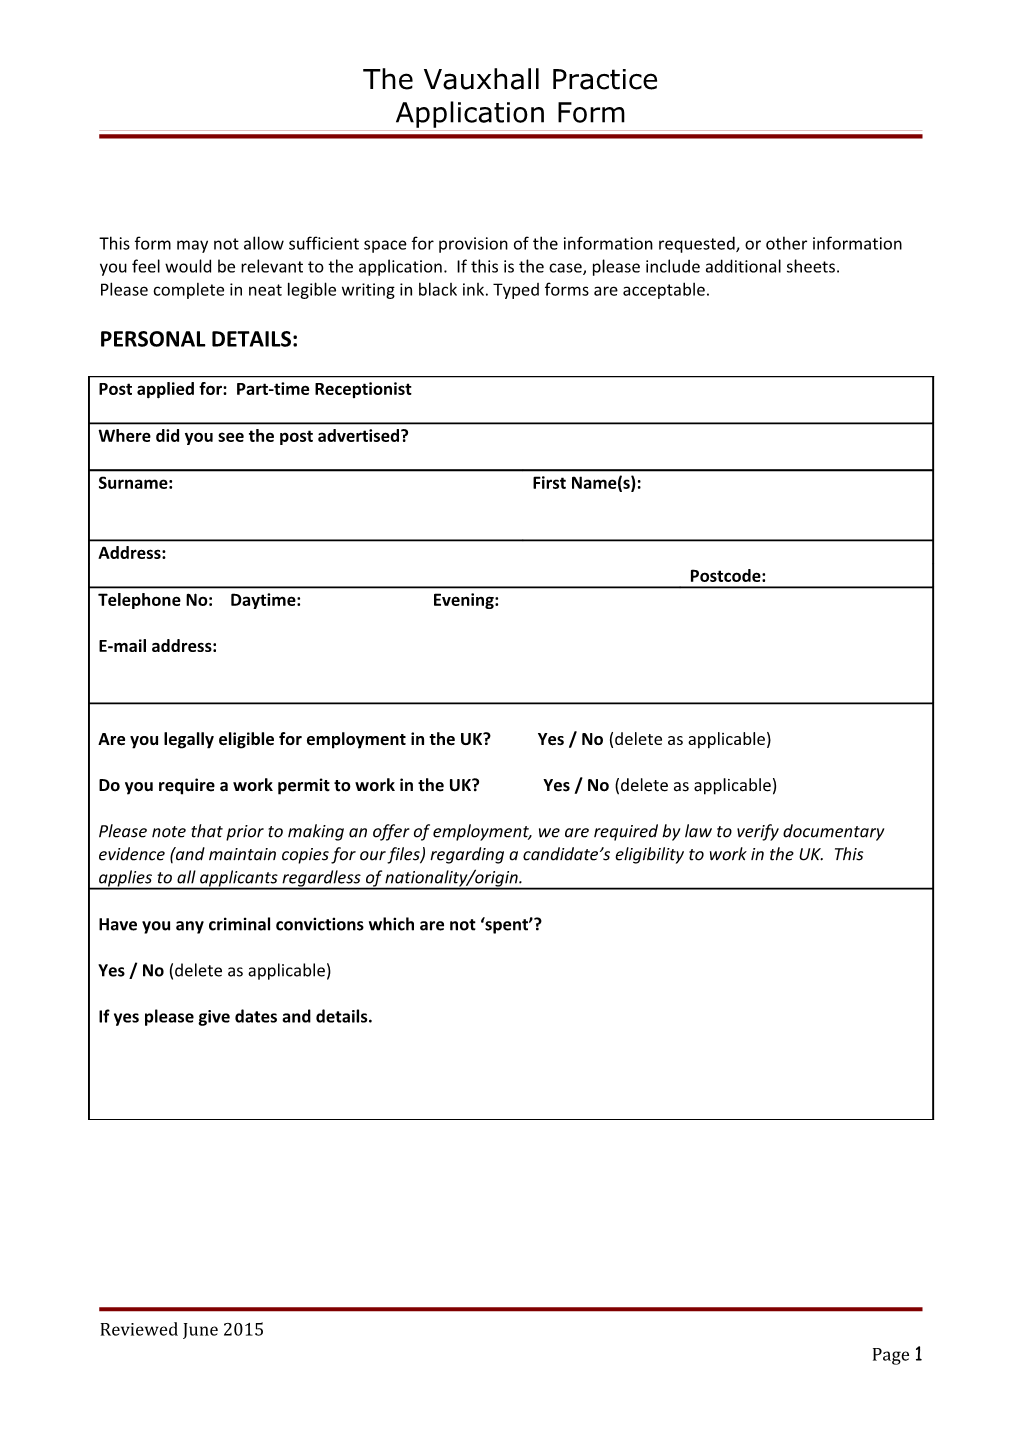 The Vauxhall Practice Application Form